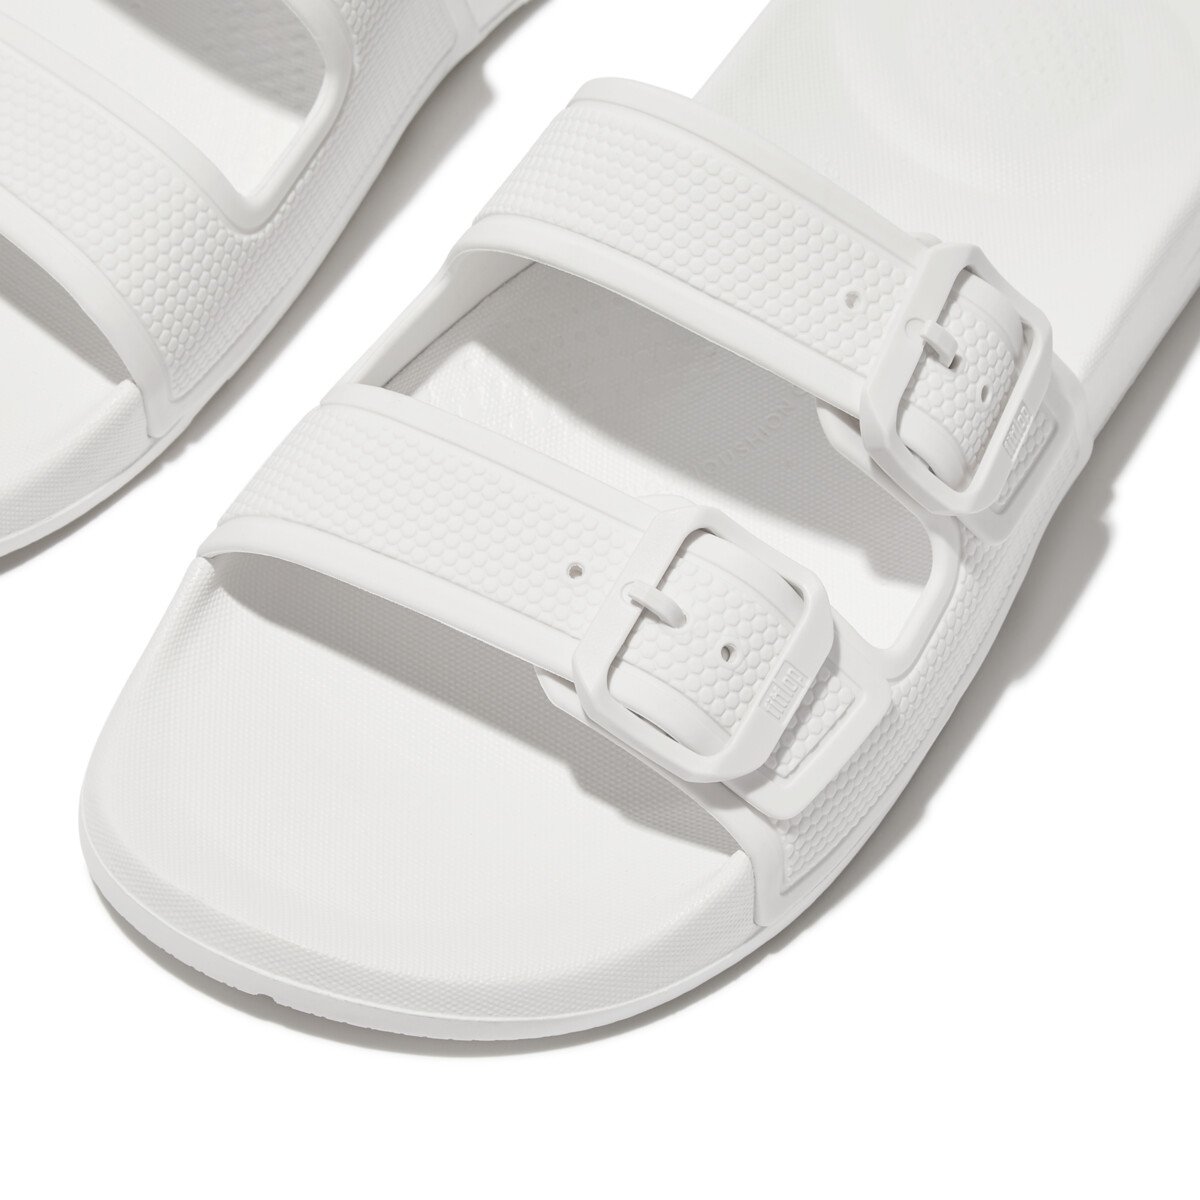 FitFlop iQUSHION Two-Bar Buckle Slides Urban White close up